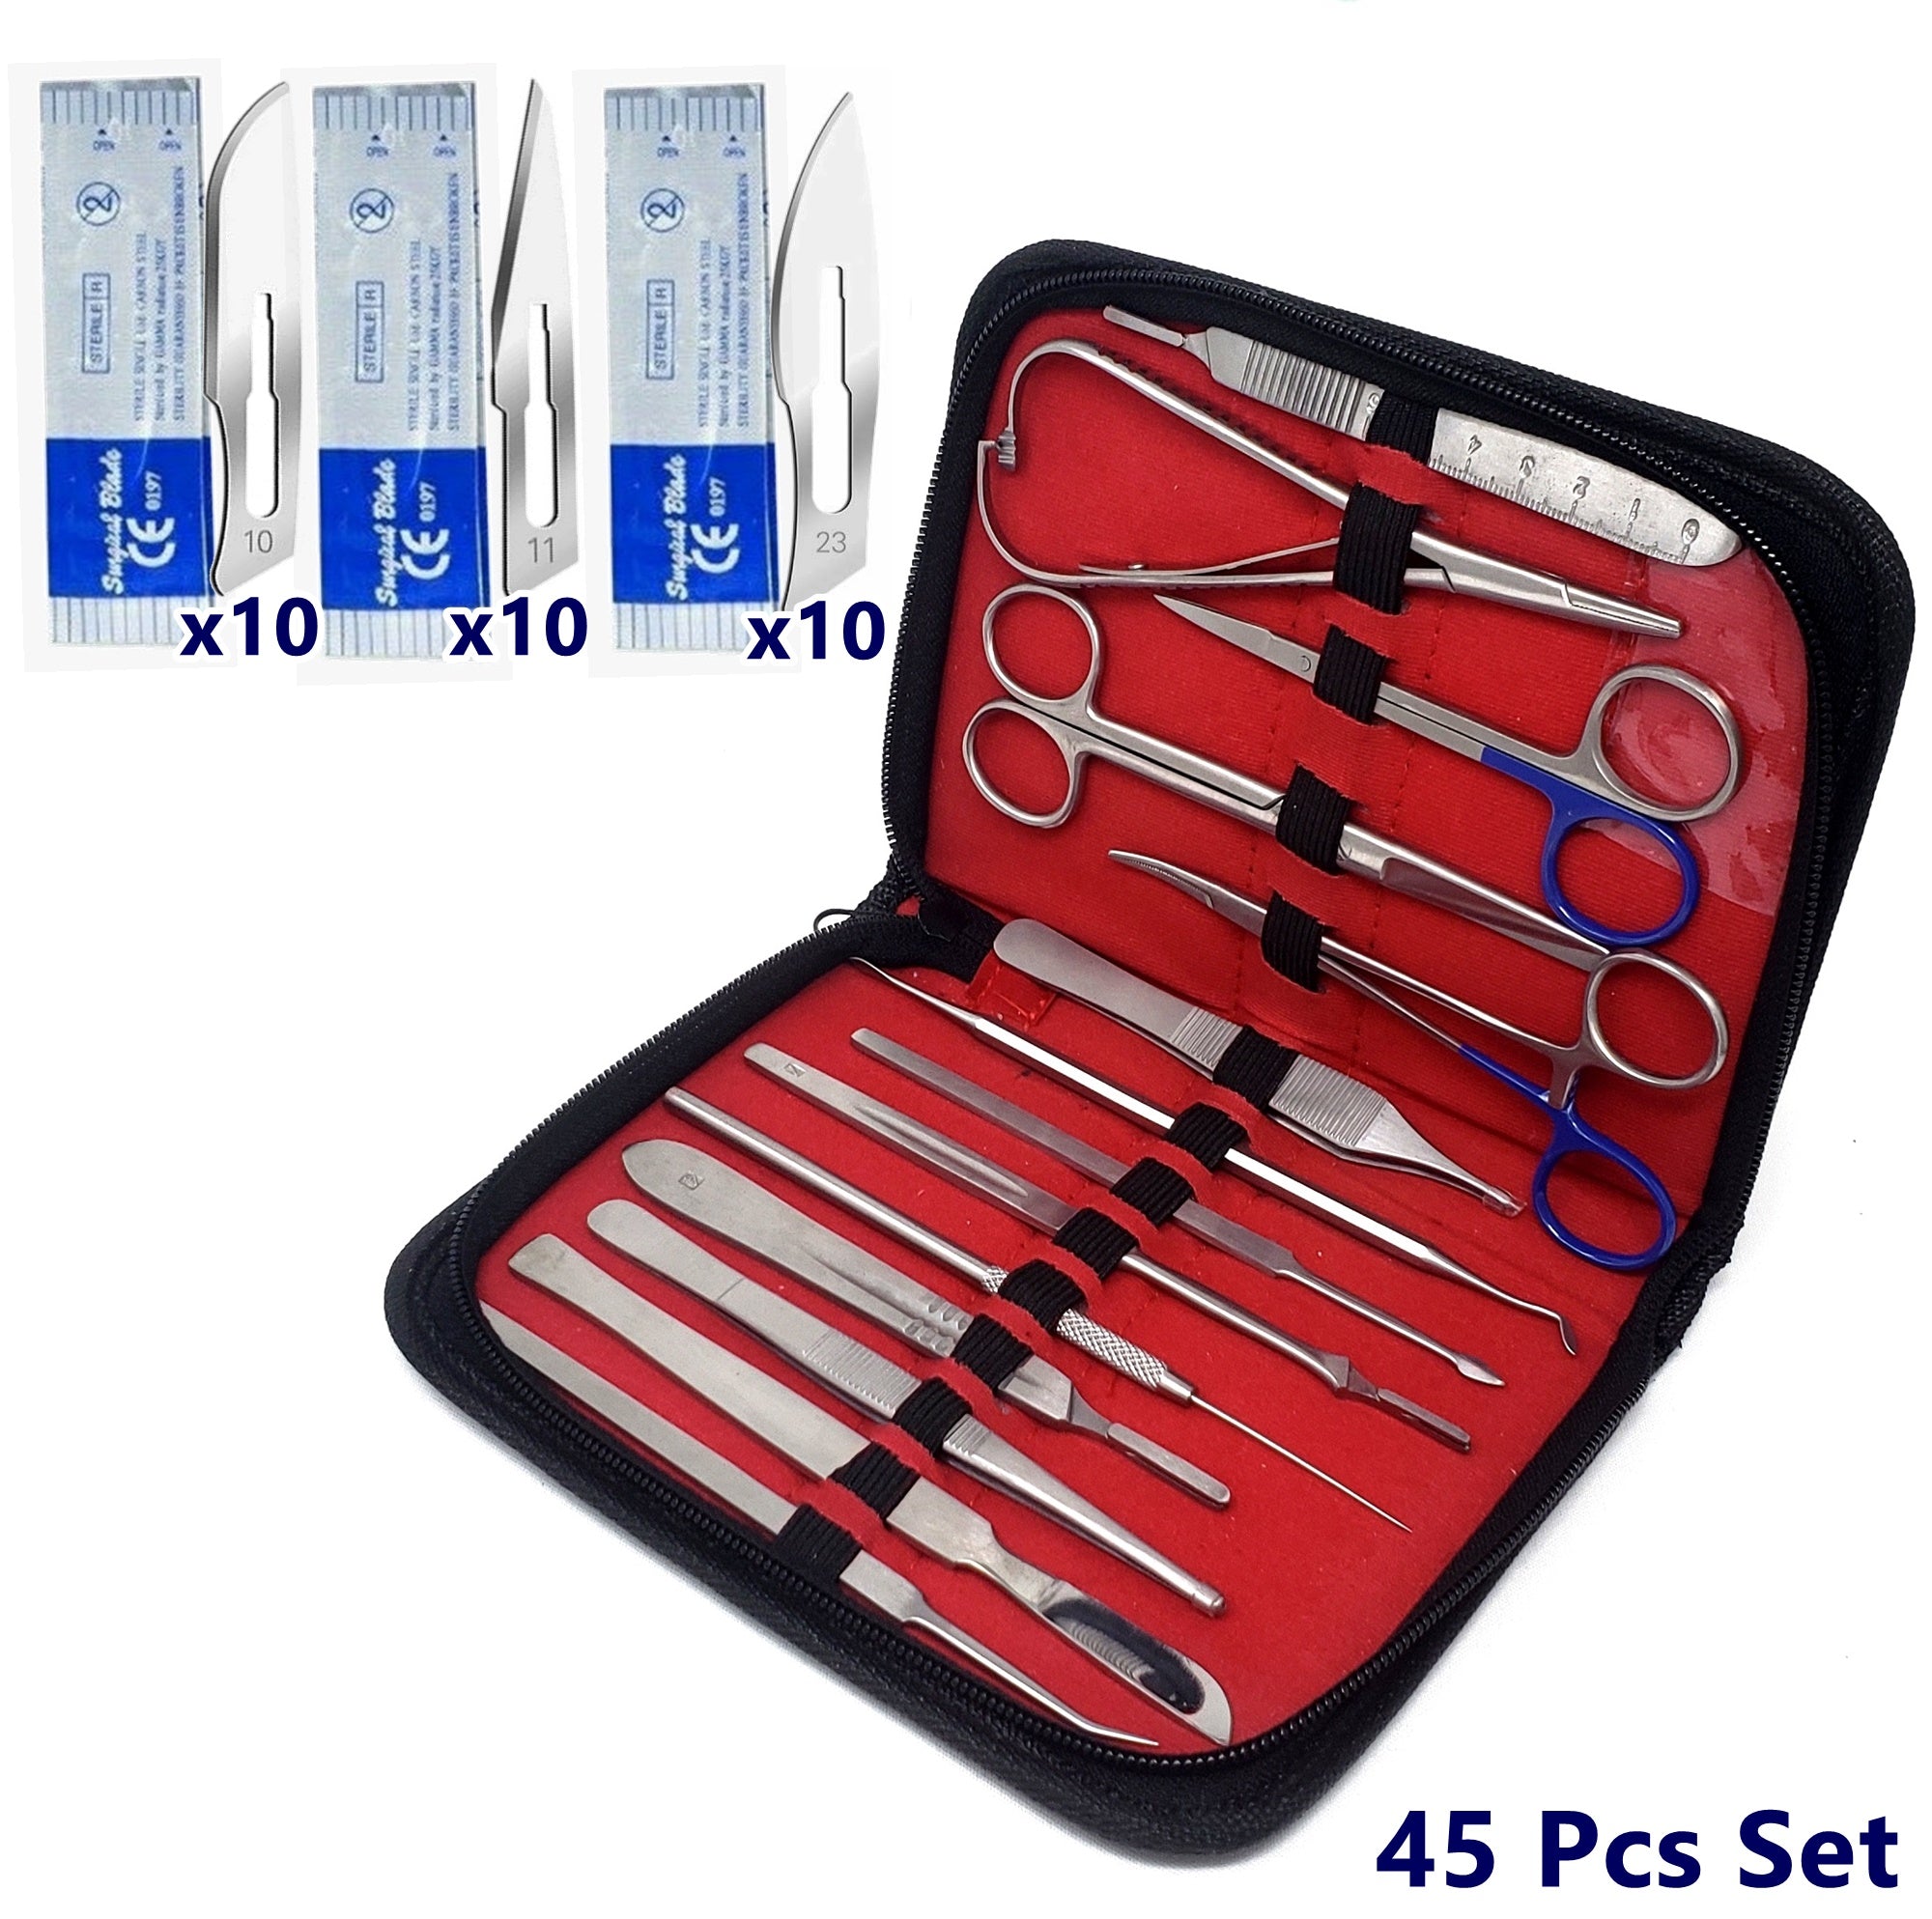 54 Pieces/Set Jewelry Making Tools Kit Pliers Scissors Tweezers for Beading Crafting with Case